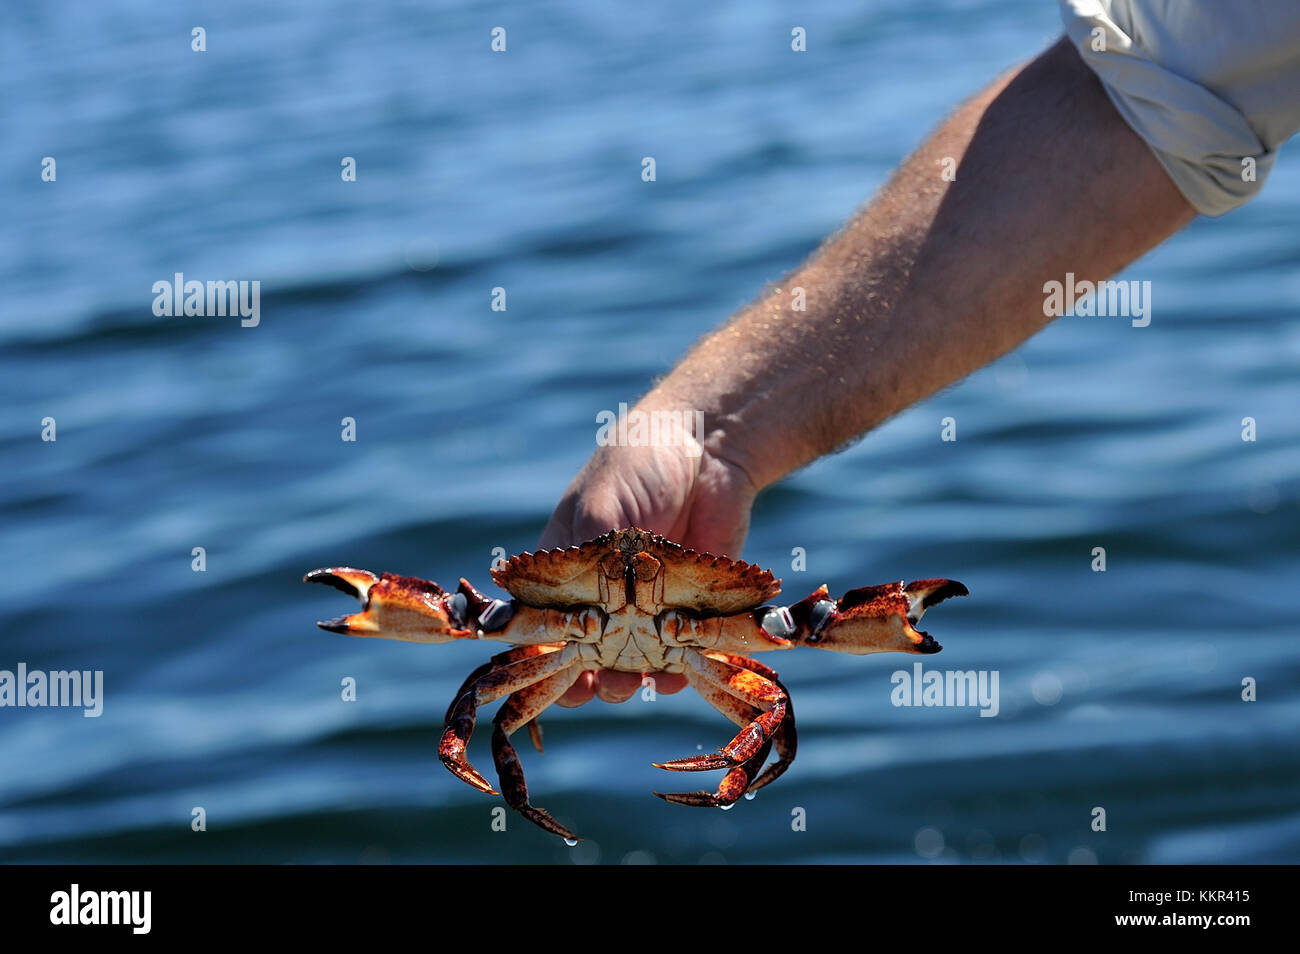 A Red Rock Crab (Cancer productus) being held after being caught in a crab trap off the coast of Vancouver Island, British Columbia,Canada. Stock Photo